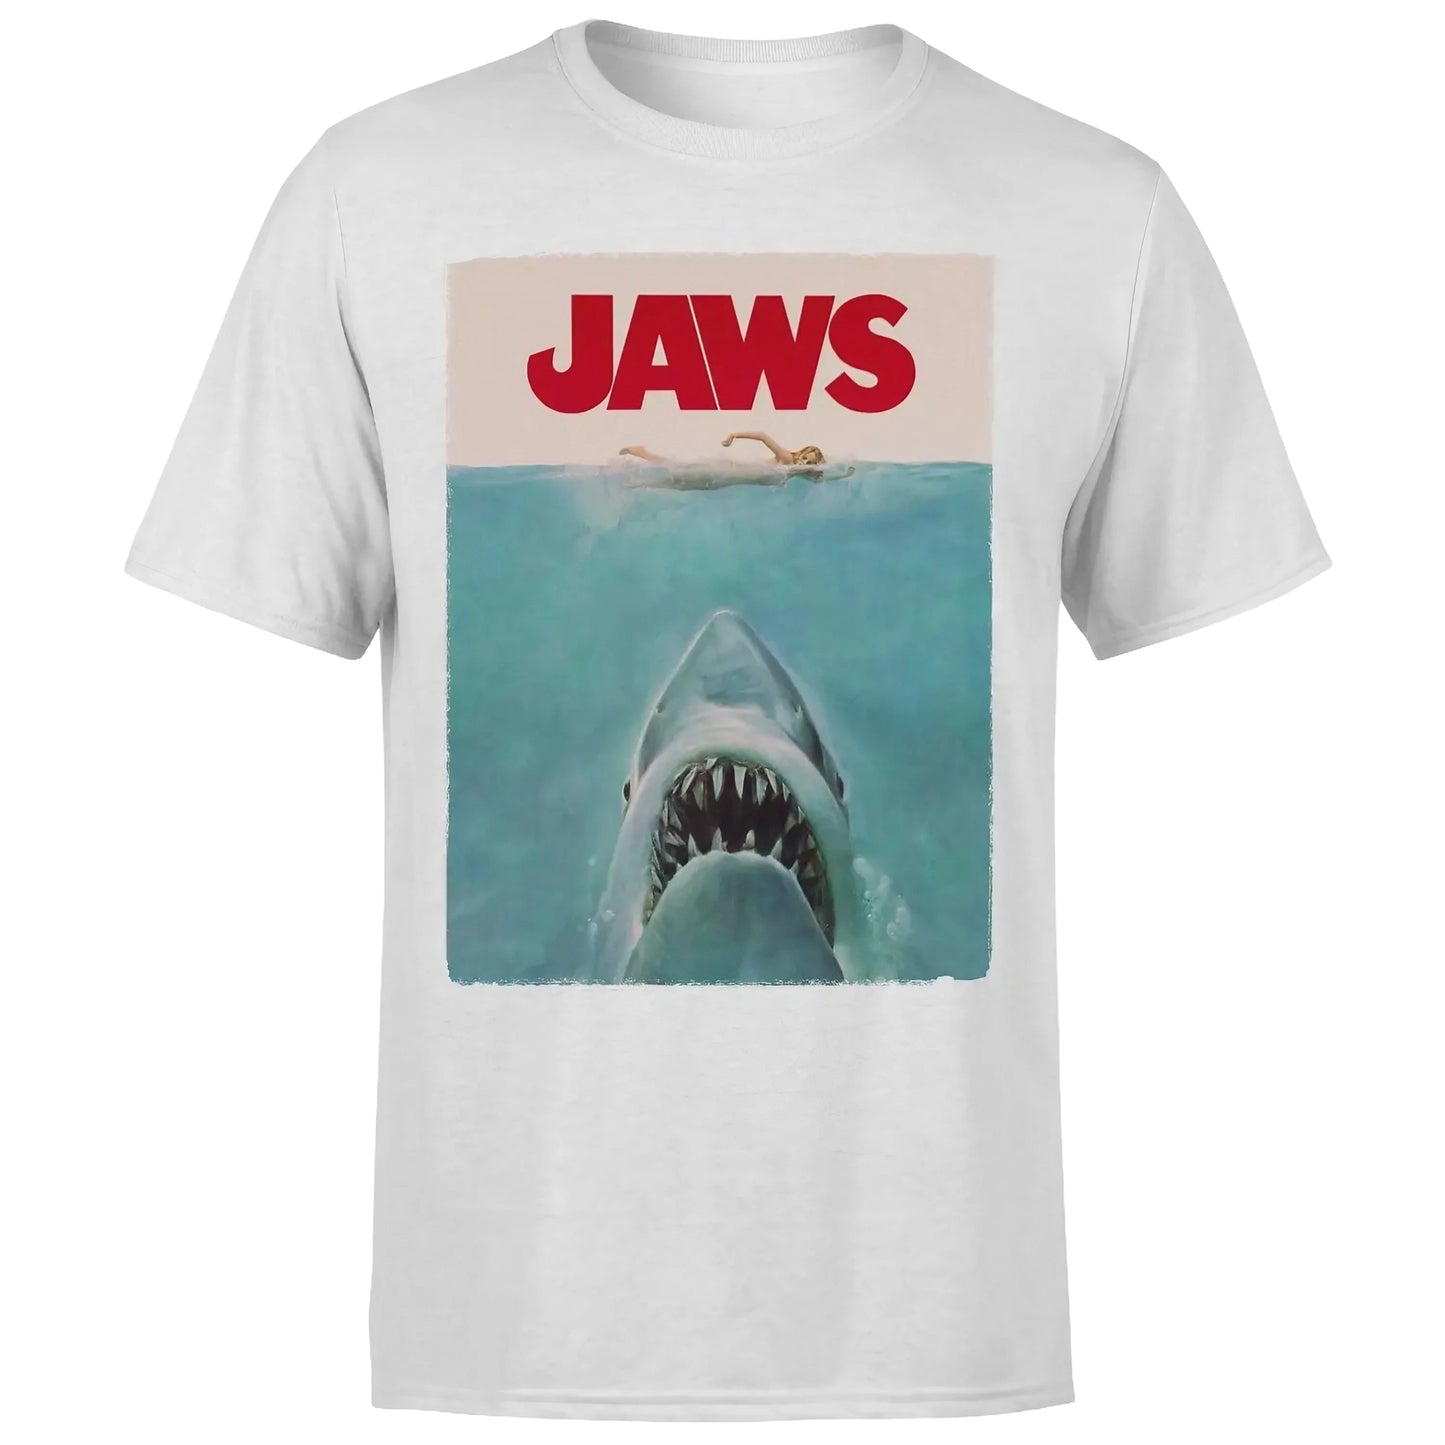 T-shirt with JAWS movie poster graphic design